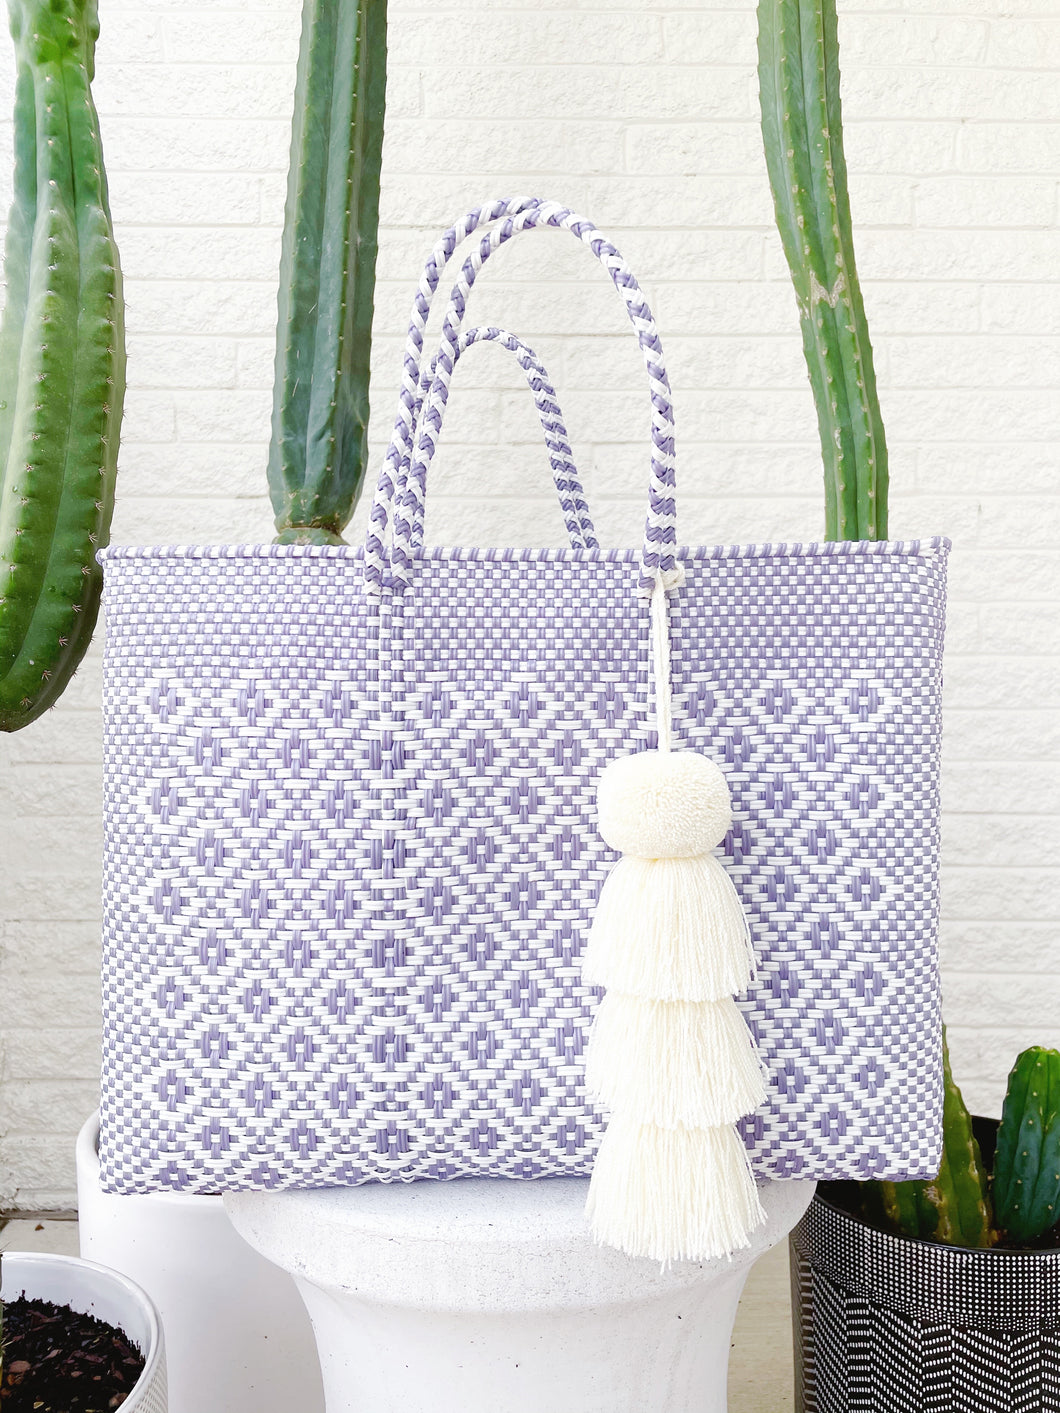 Large handwoven tote